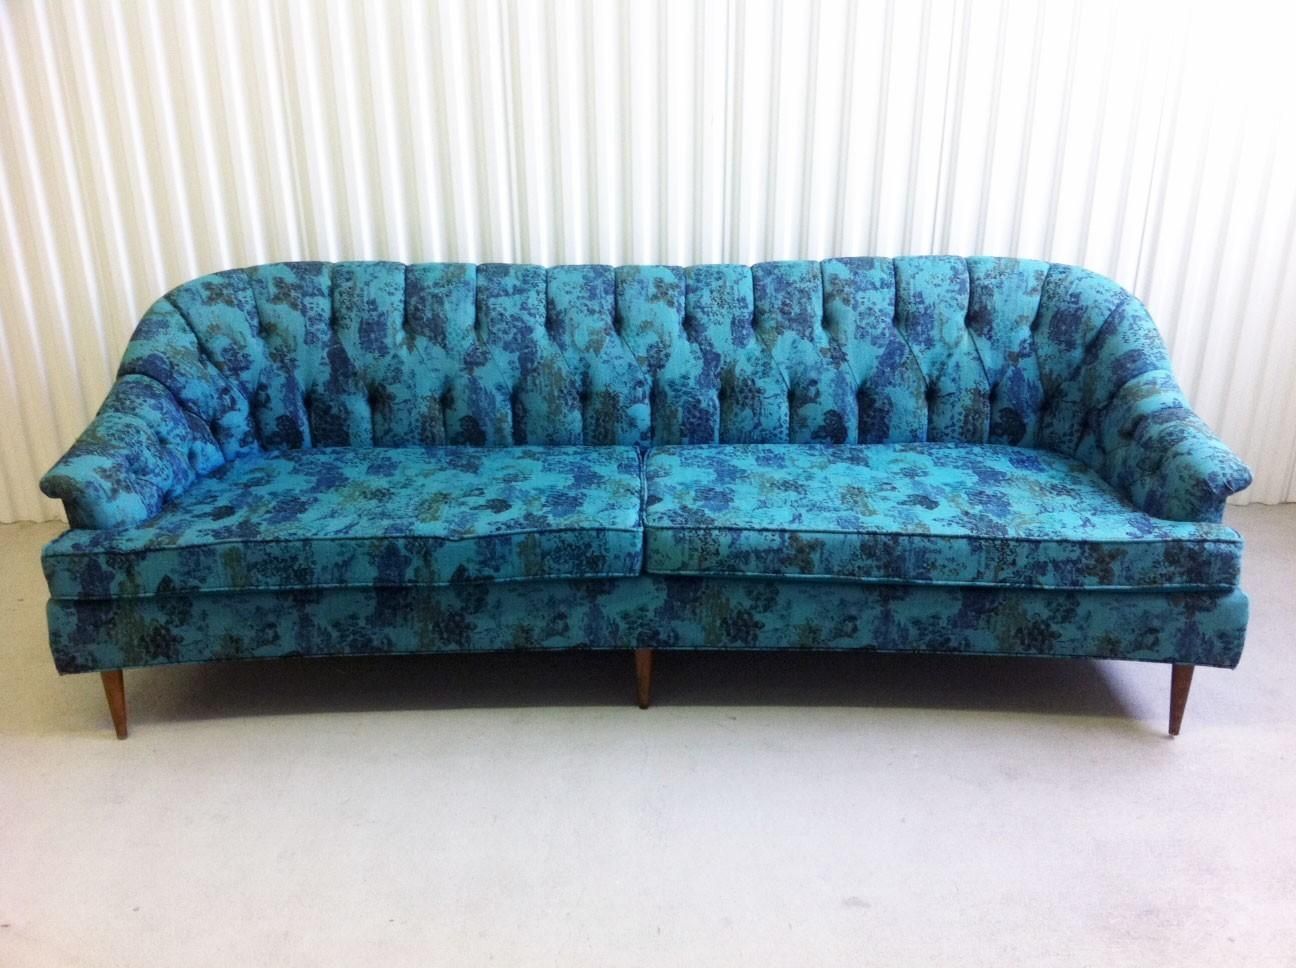 Sofa. Vintage Sofas For Sale – Rueckspiegel In Funky Sofas For Sale (Photo 2 of 20)